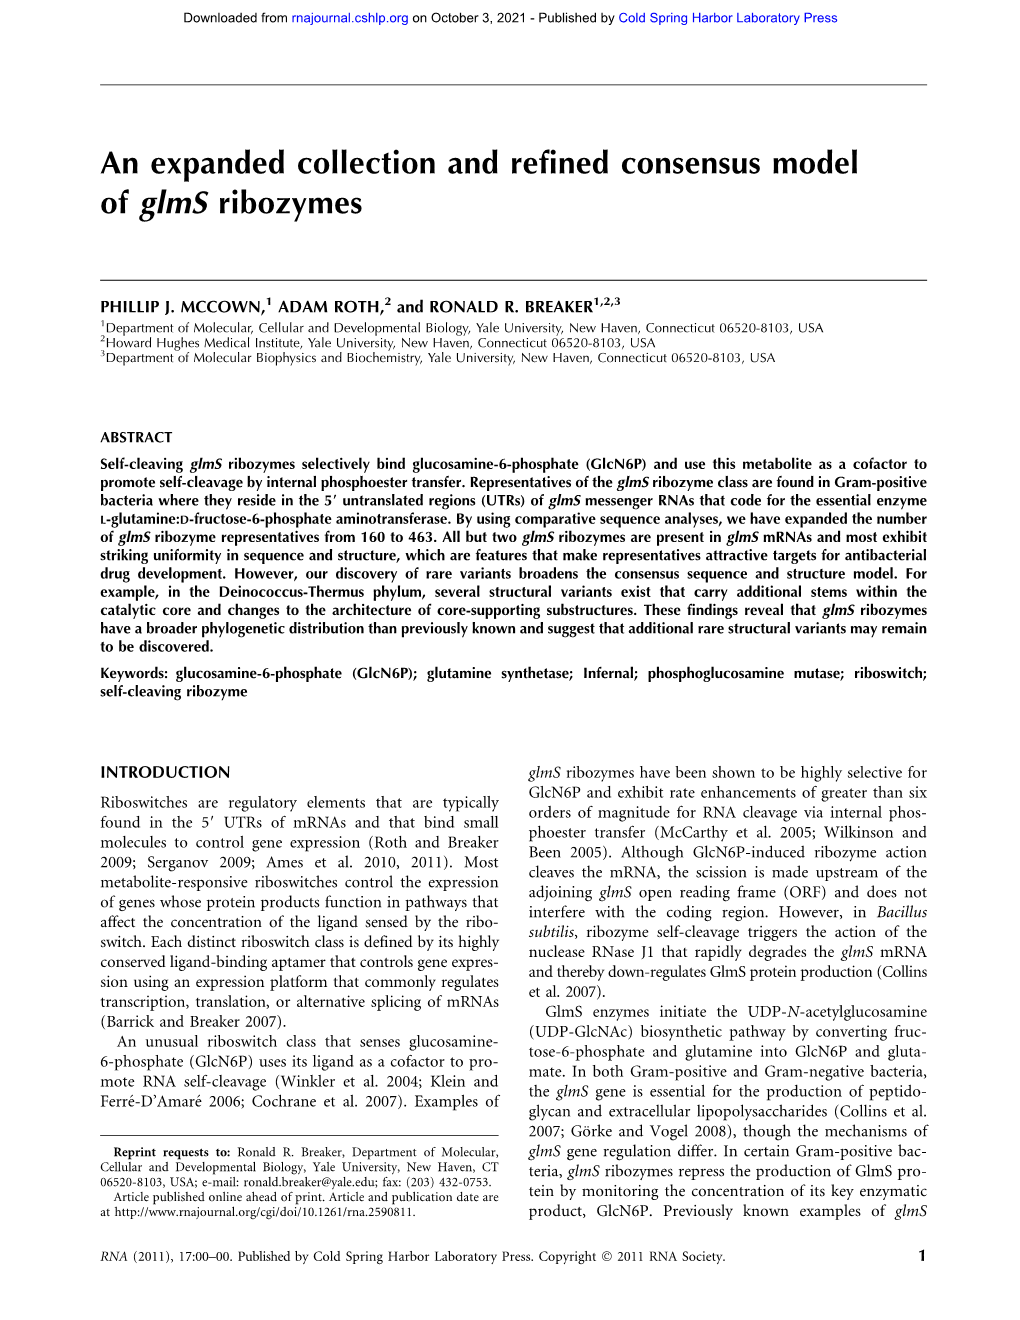 An Expanded Collection and Refined Consensus Model of Glms Ribozymes